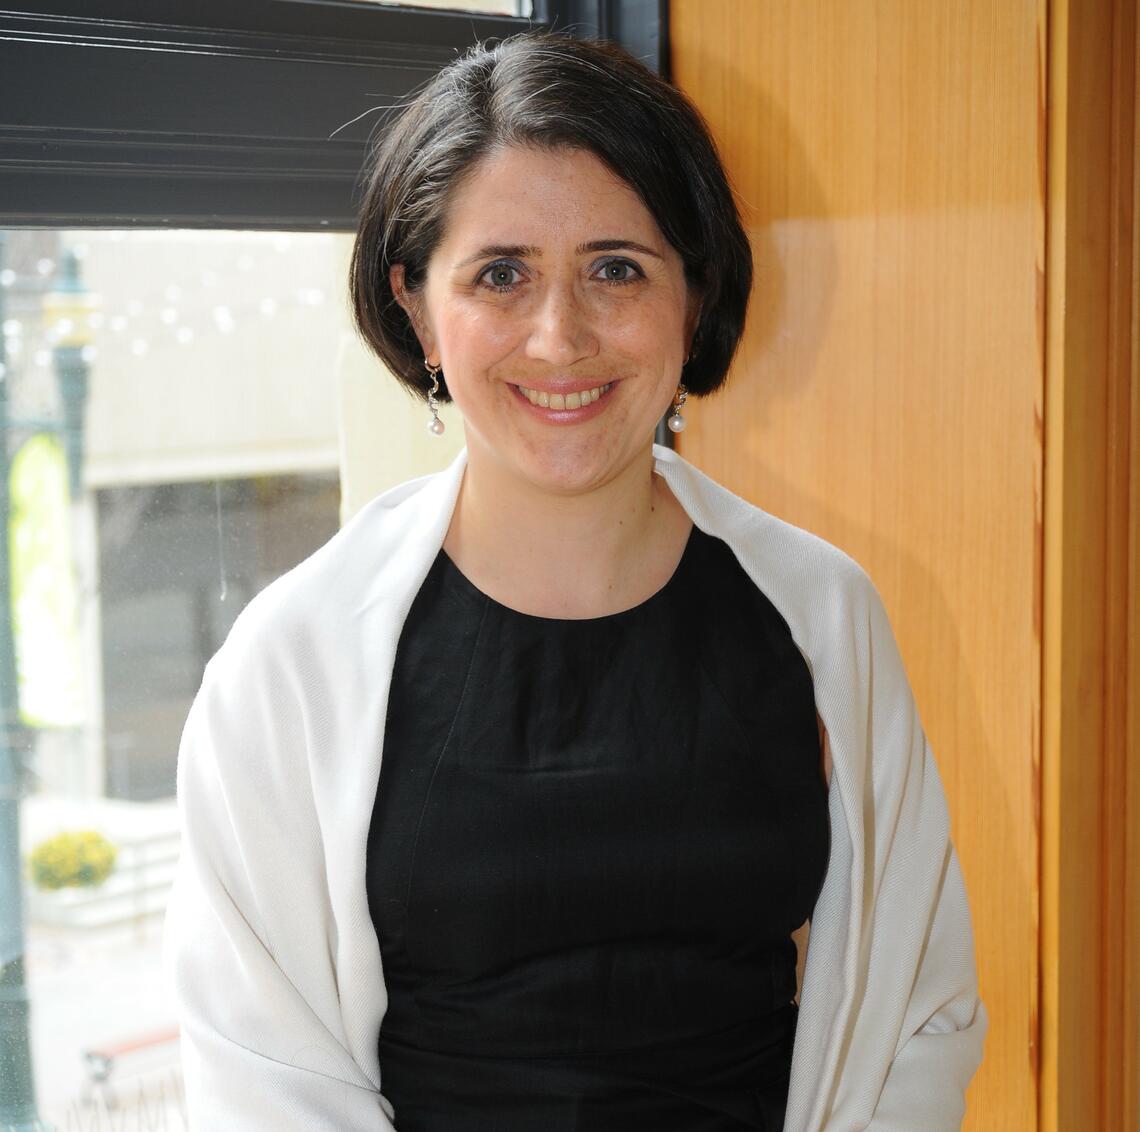 Dr. Laleh Behjat posing in front of a window.